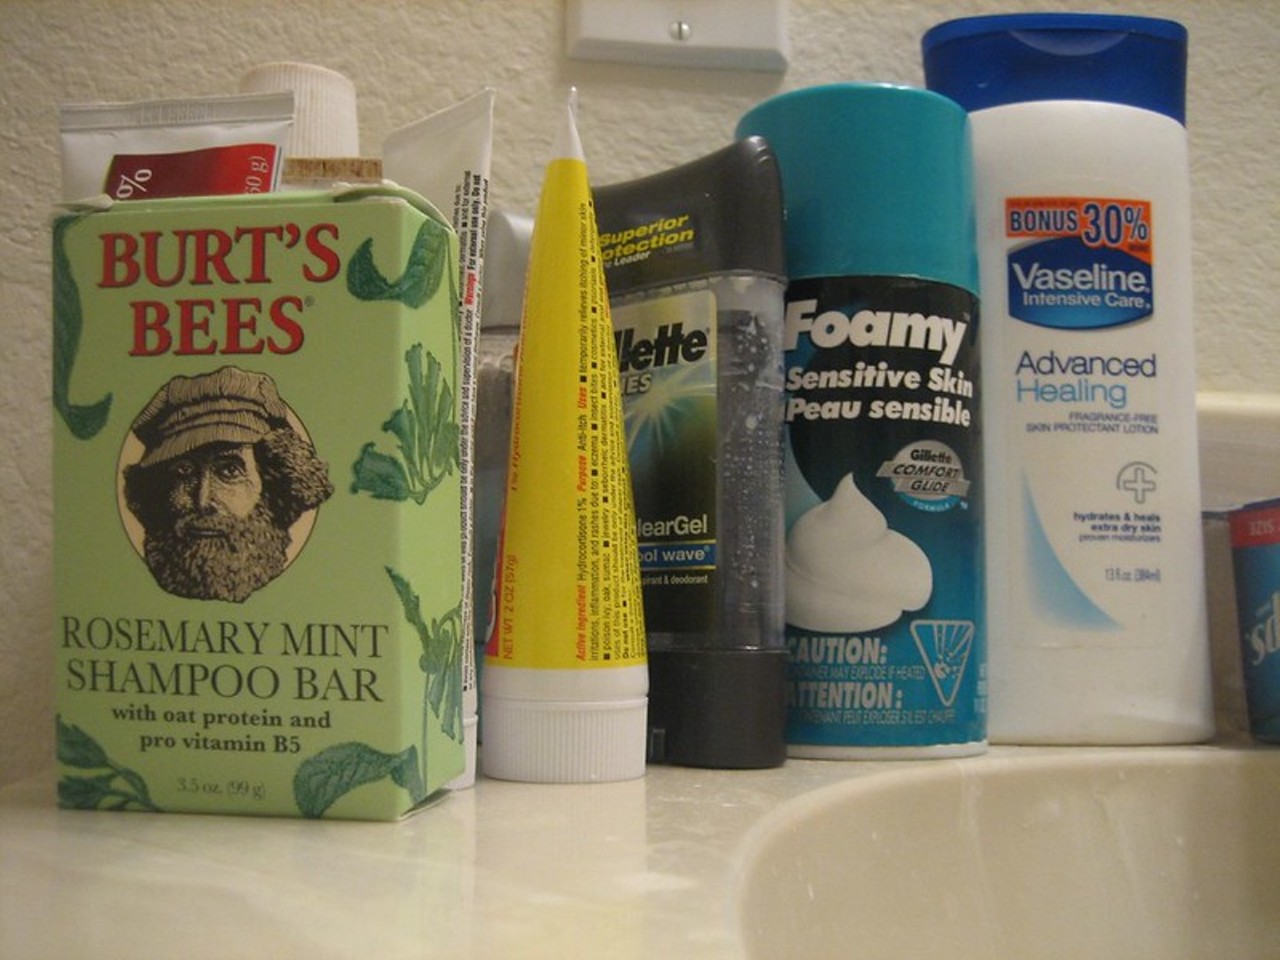 Remove everything from the bathroom that you don&#146;t need in there.
If someone in your house gets sick, the restroom is going likely to be ground zero for potential contamination. Take everything out of the restroom that isn&#146;t related to showering so you can avoid it as much as possible. That includes lotions or mirrors or makeup or anything else you might want to pop in to grab.
Photo credit: Jeremy Vaught / Flickr